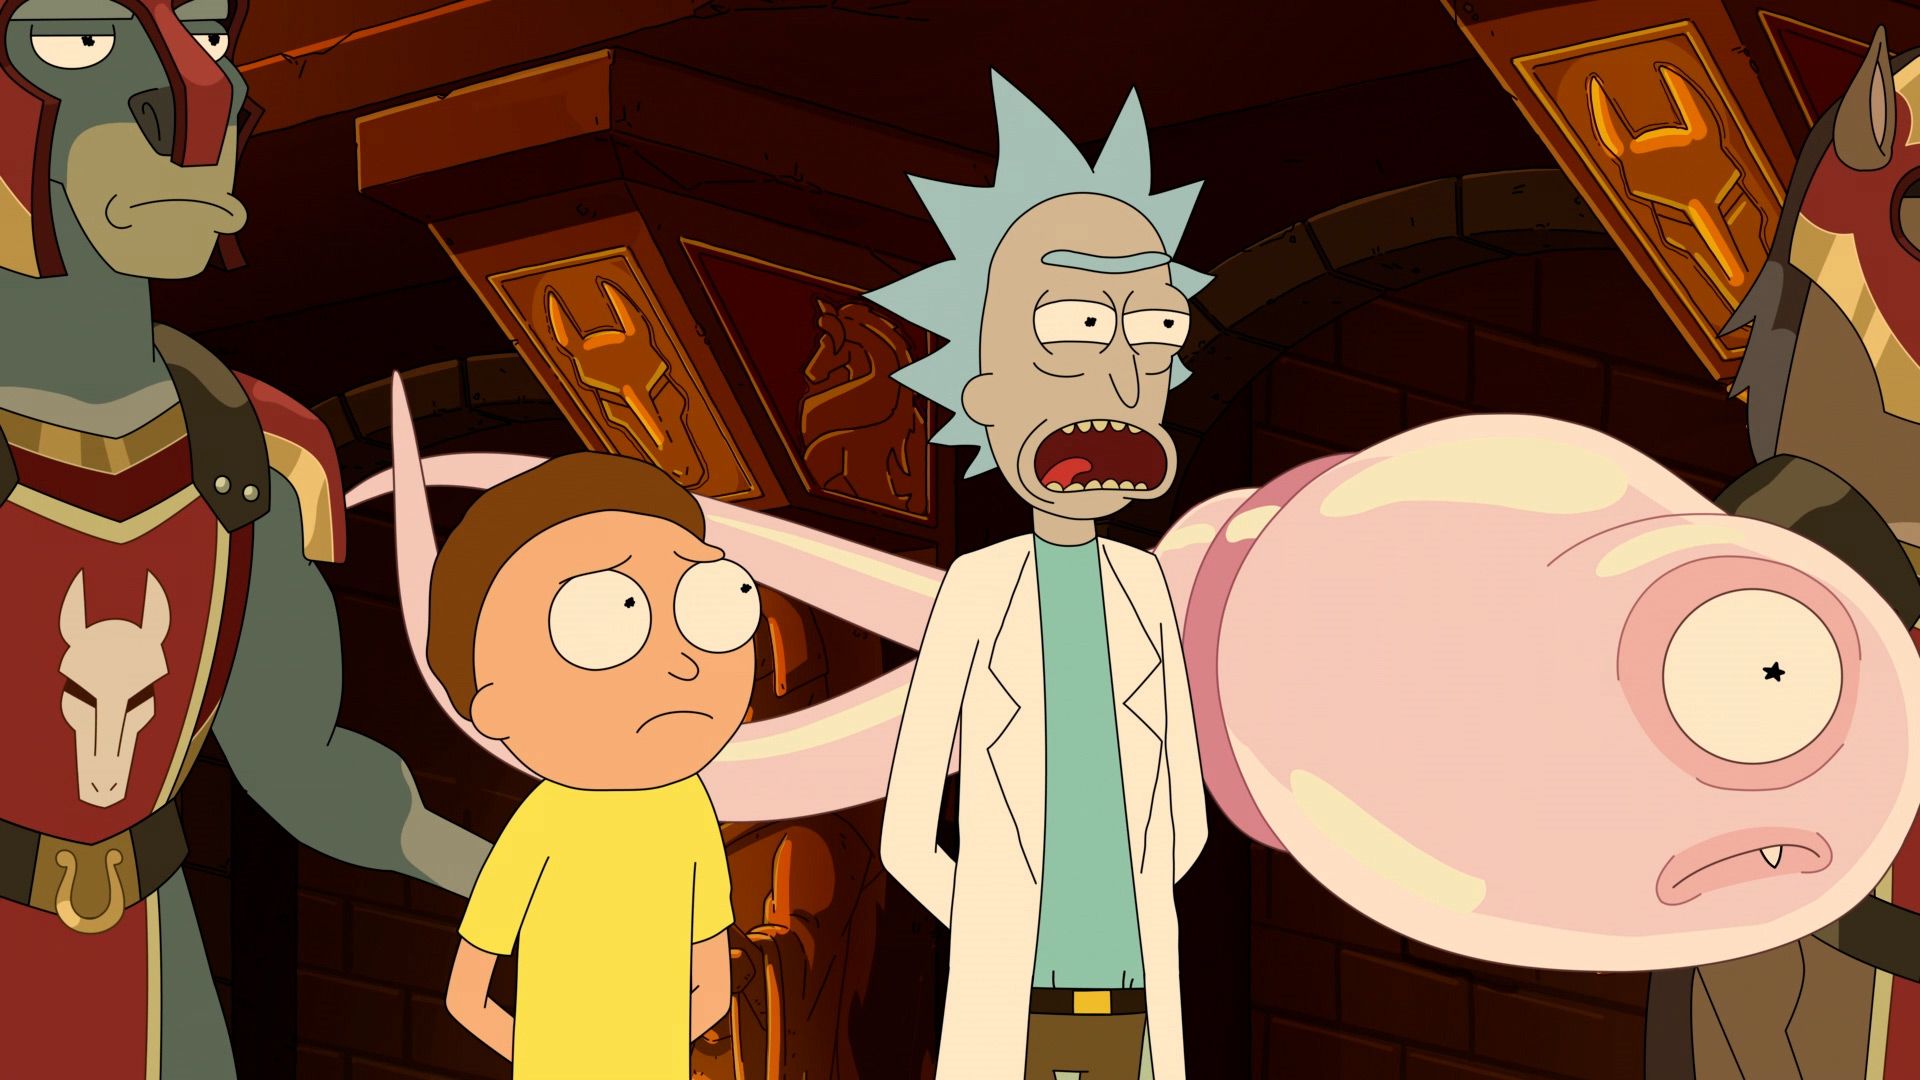 How to Watch 'Rick and Morty' Season 5 Episode 2 Online Free